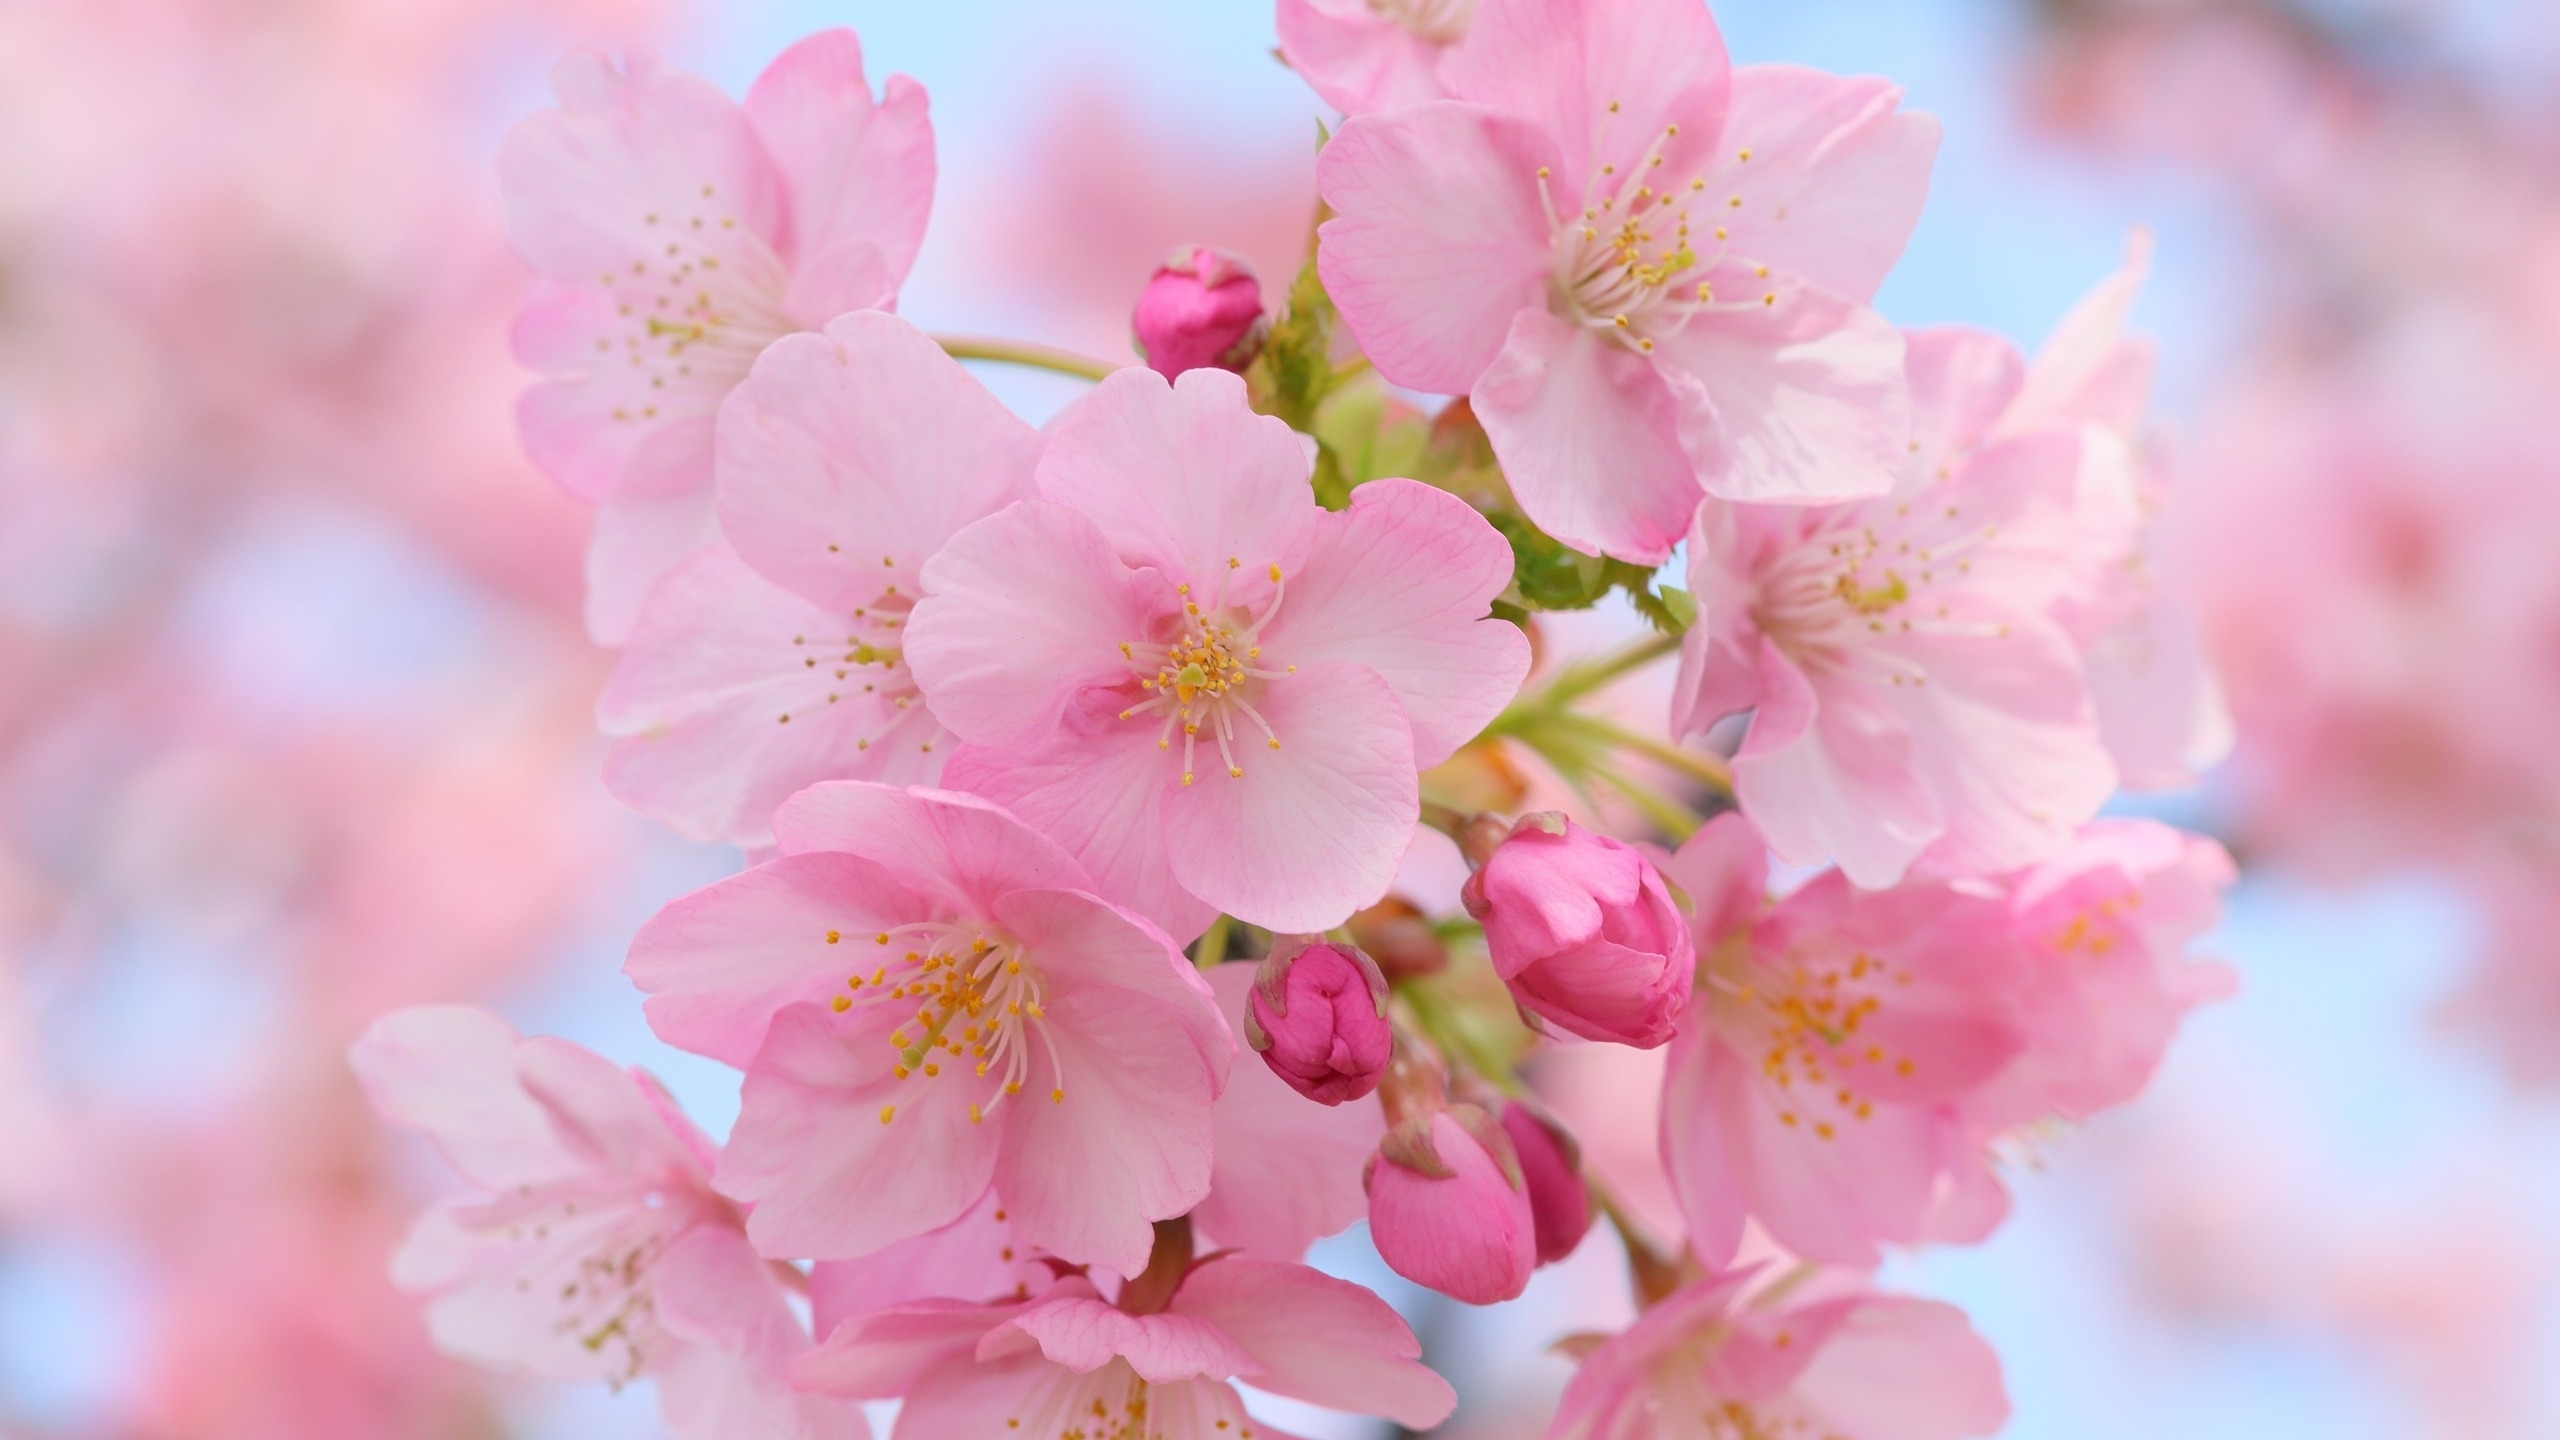 Pink Cherry Blossom for 2560x1440 HDTV resolution